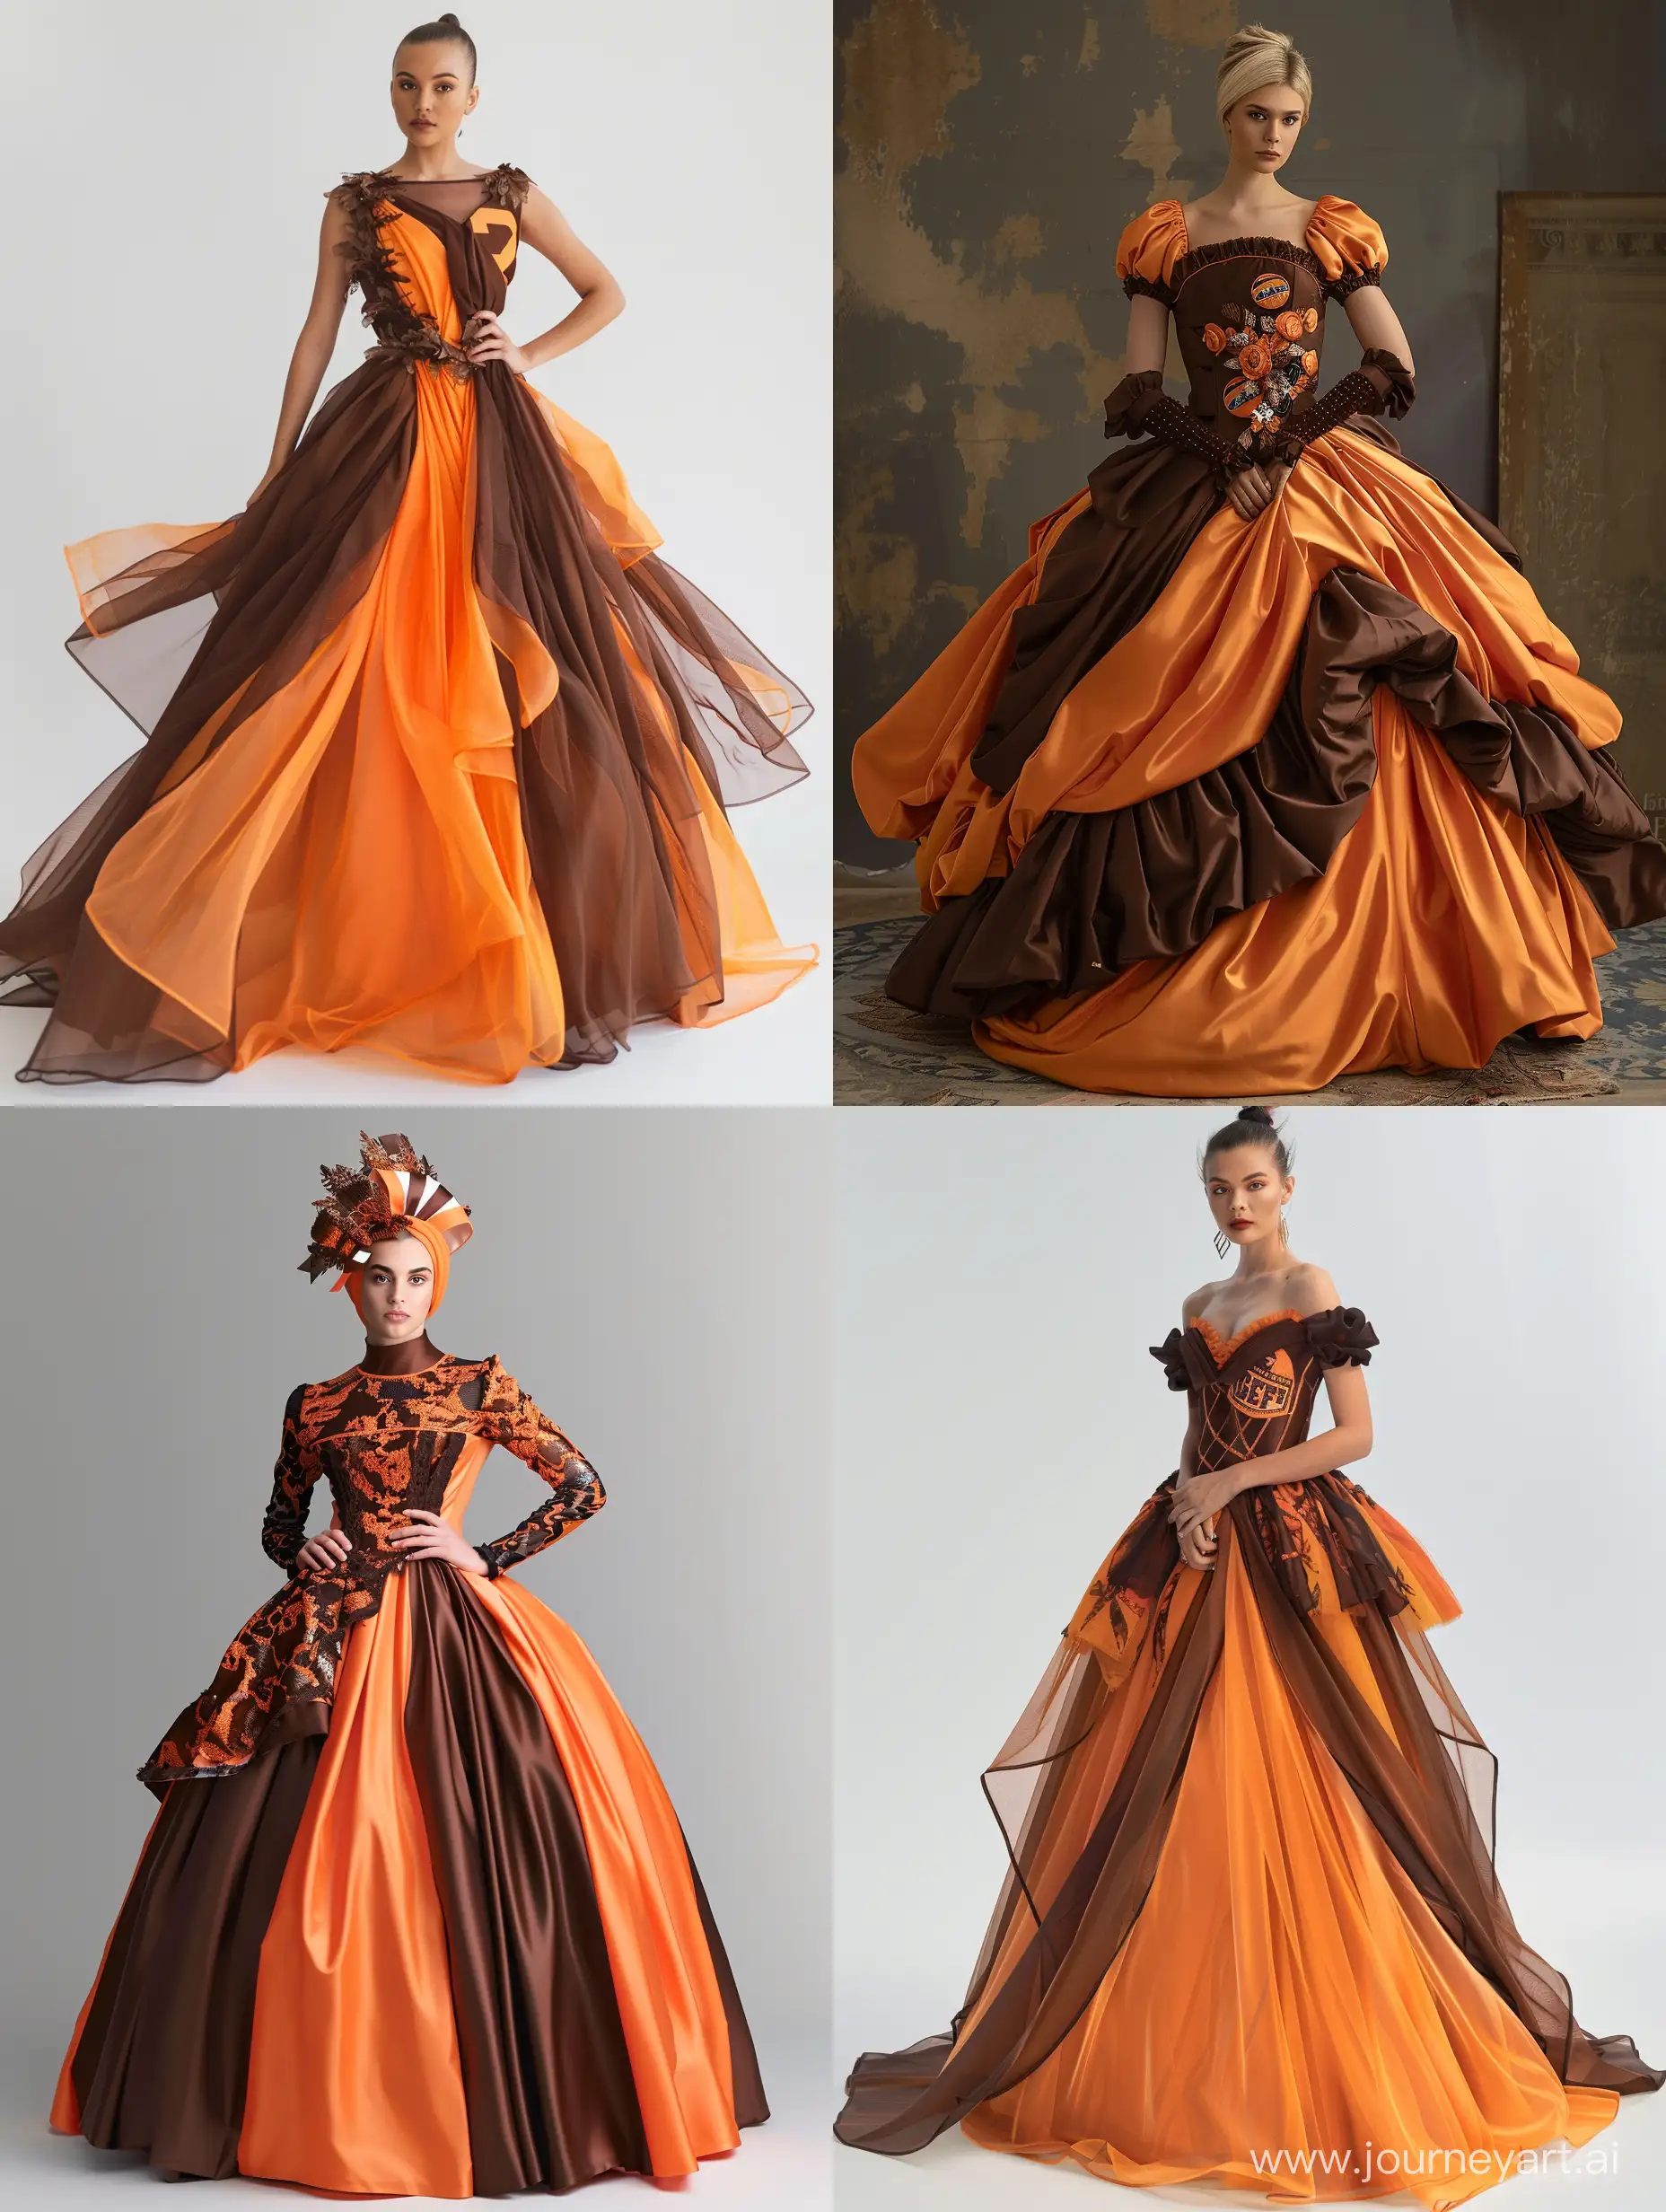 Elegant-Woman-in-Cleveland-Browns-Inspired-Ball-Gown-Vibrant-Orange-and-Brown-Fashion